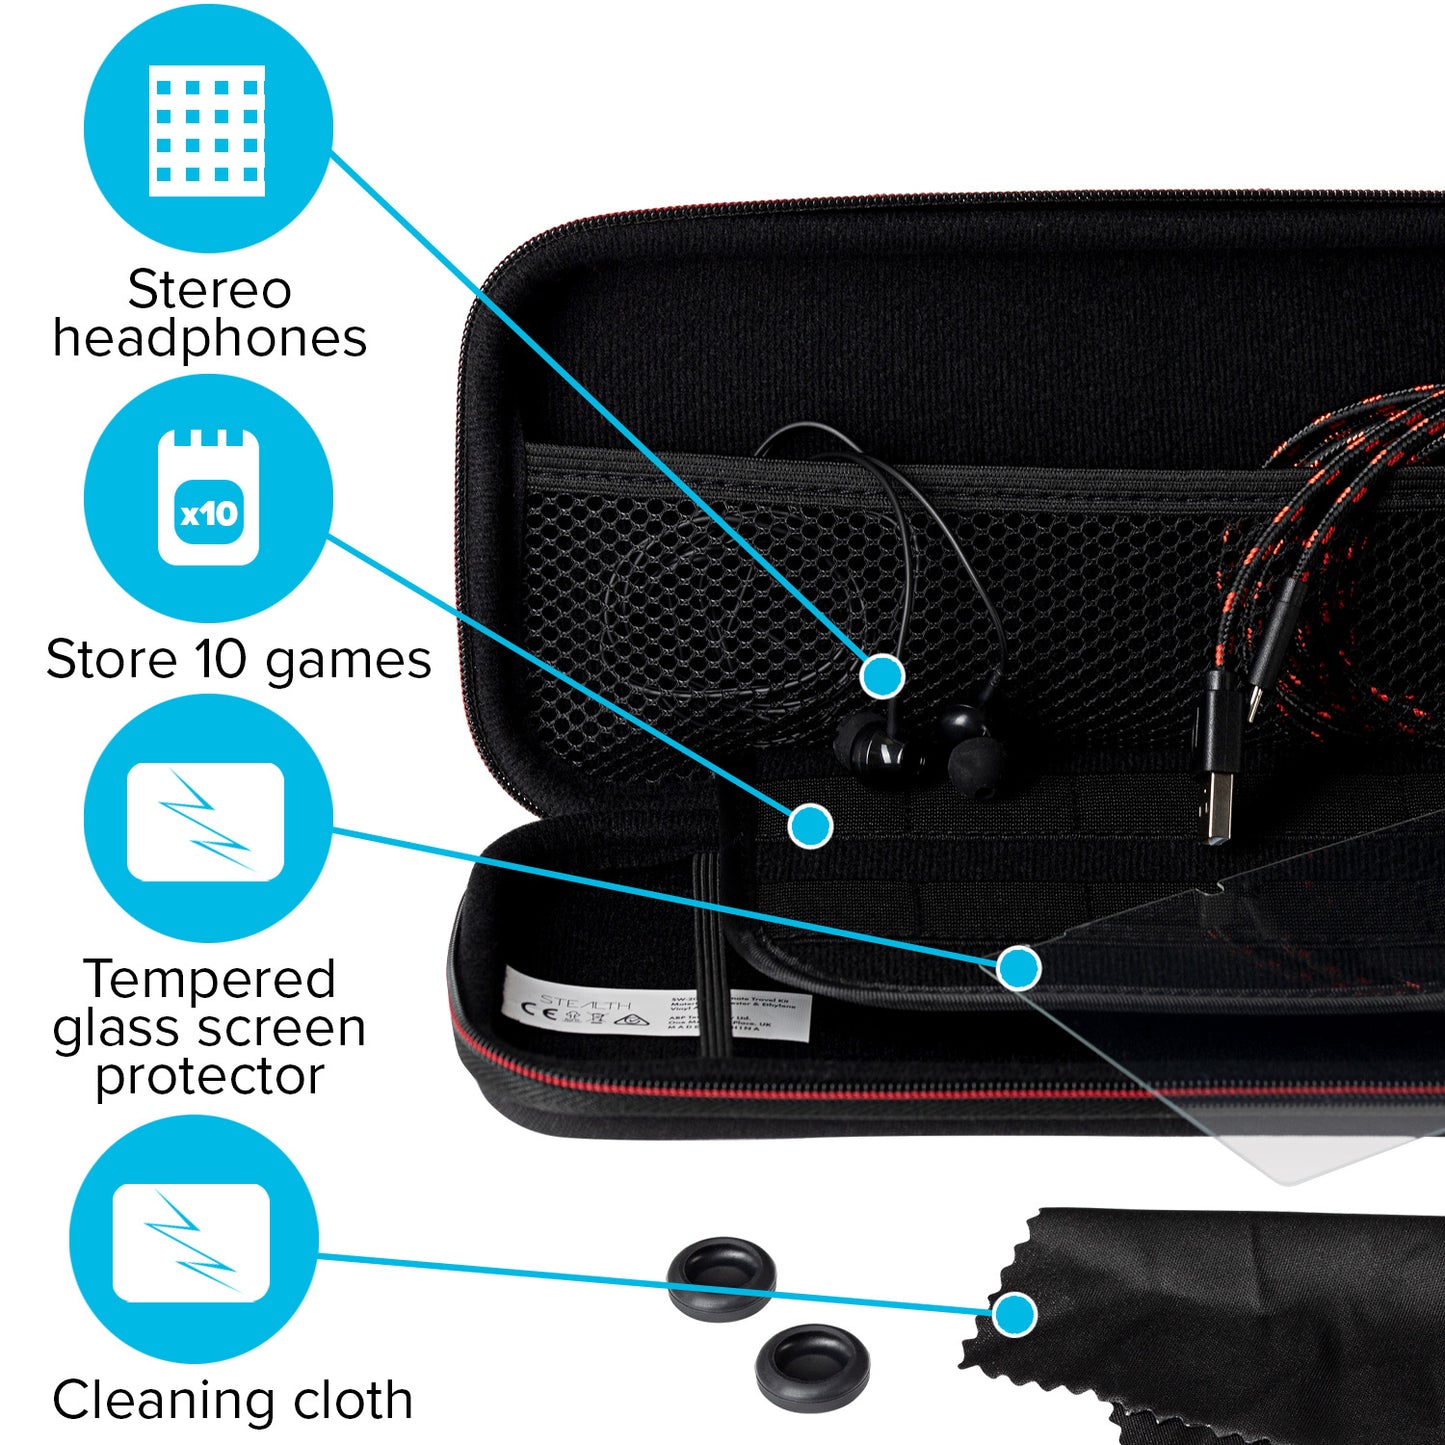 Maplin Hard Case and Cable Kit for Nintendo Switch with Earphones - maplin.co.uk